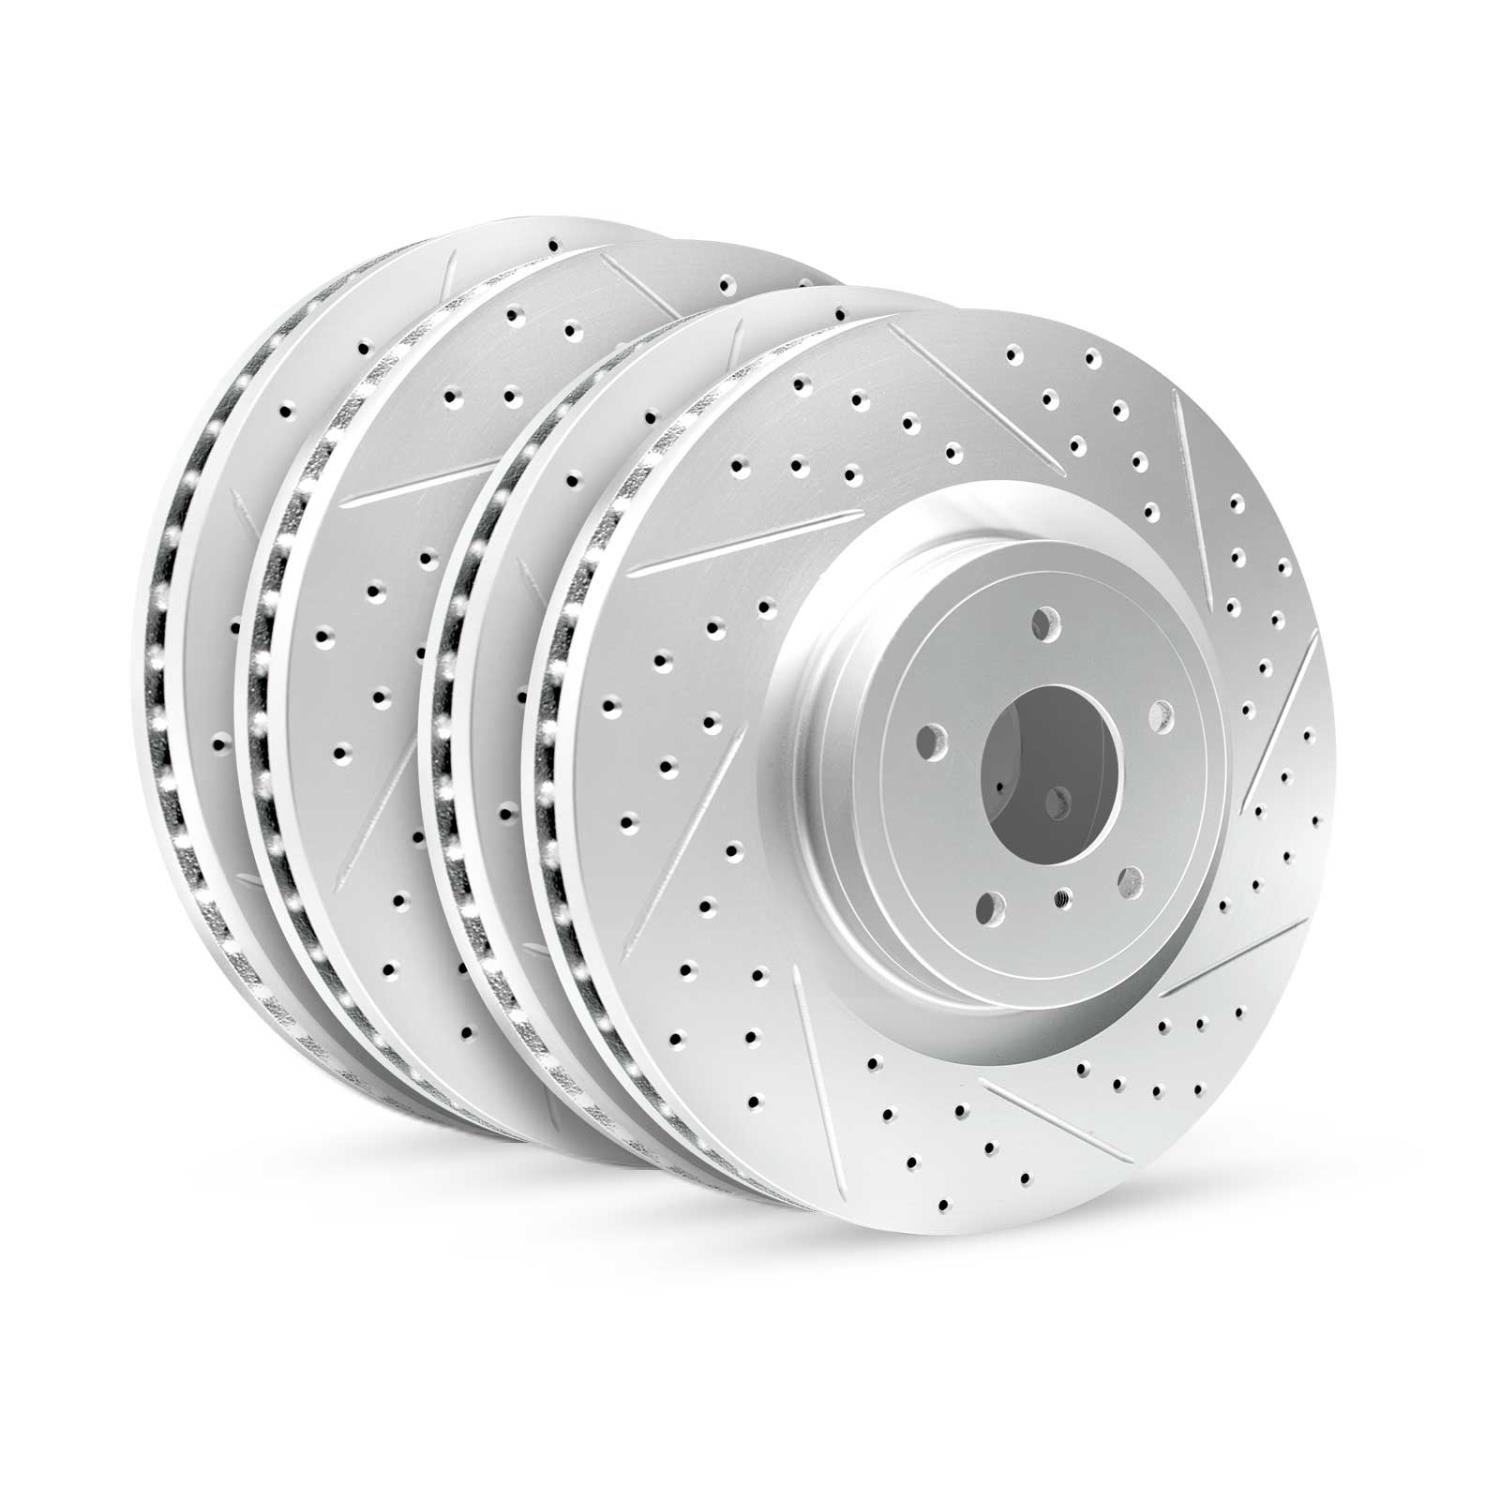 GEO-Carbon Drilled & Slotted Brake Rotor Set, Fits Select GM, Position: Front & Rear